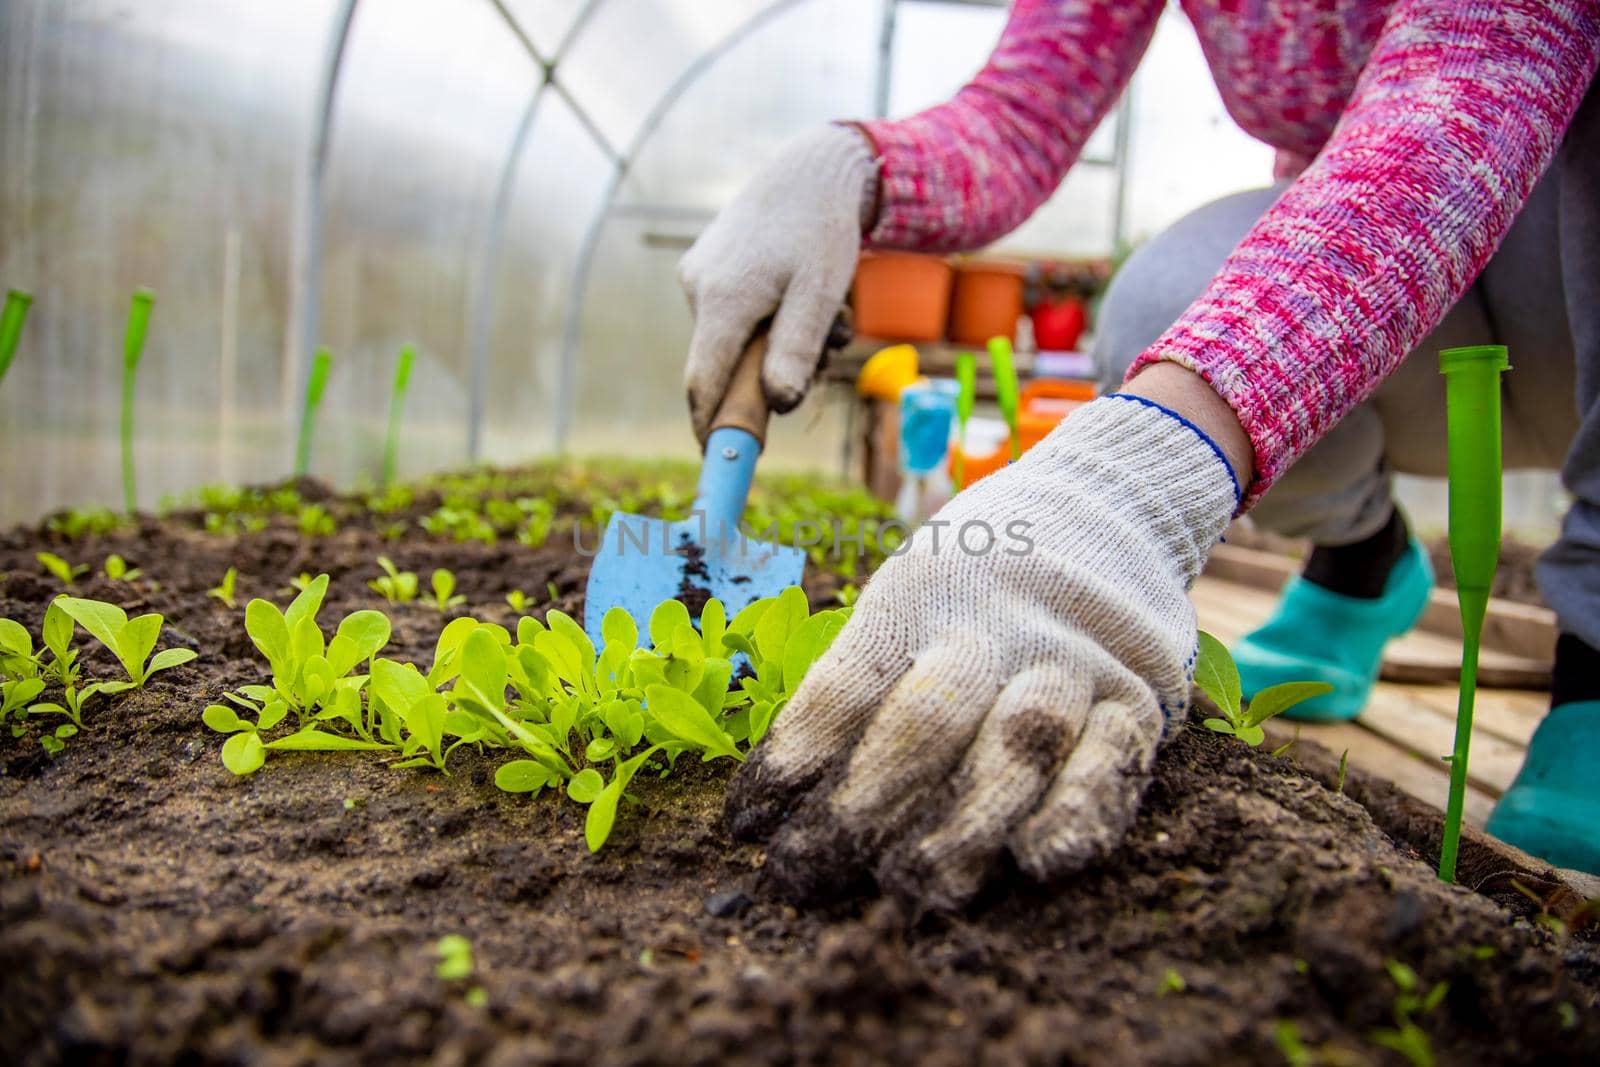 planting plants. a woman plants young sprouts in the ground. close-up. no face